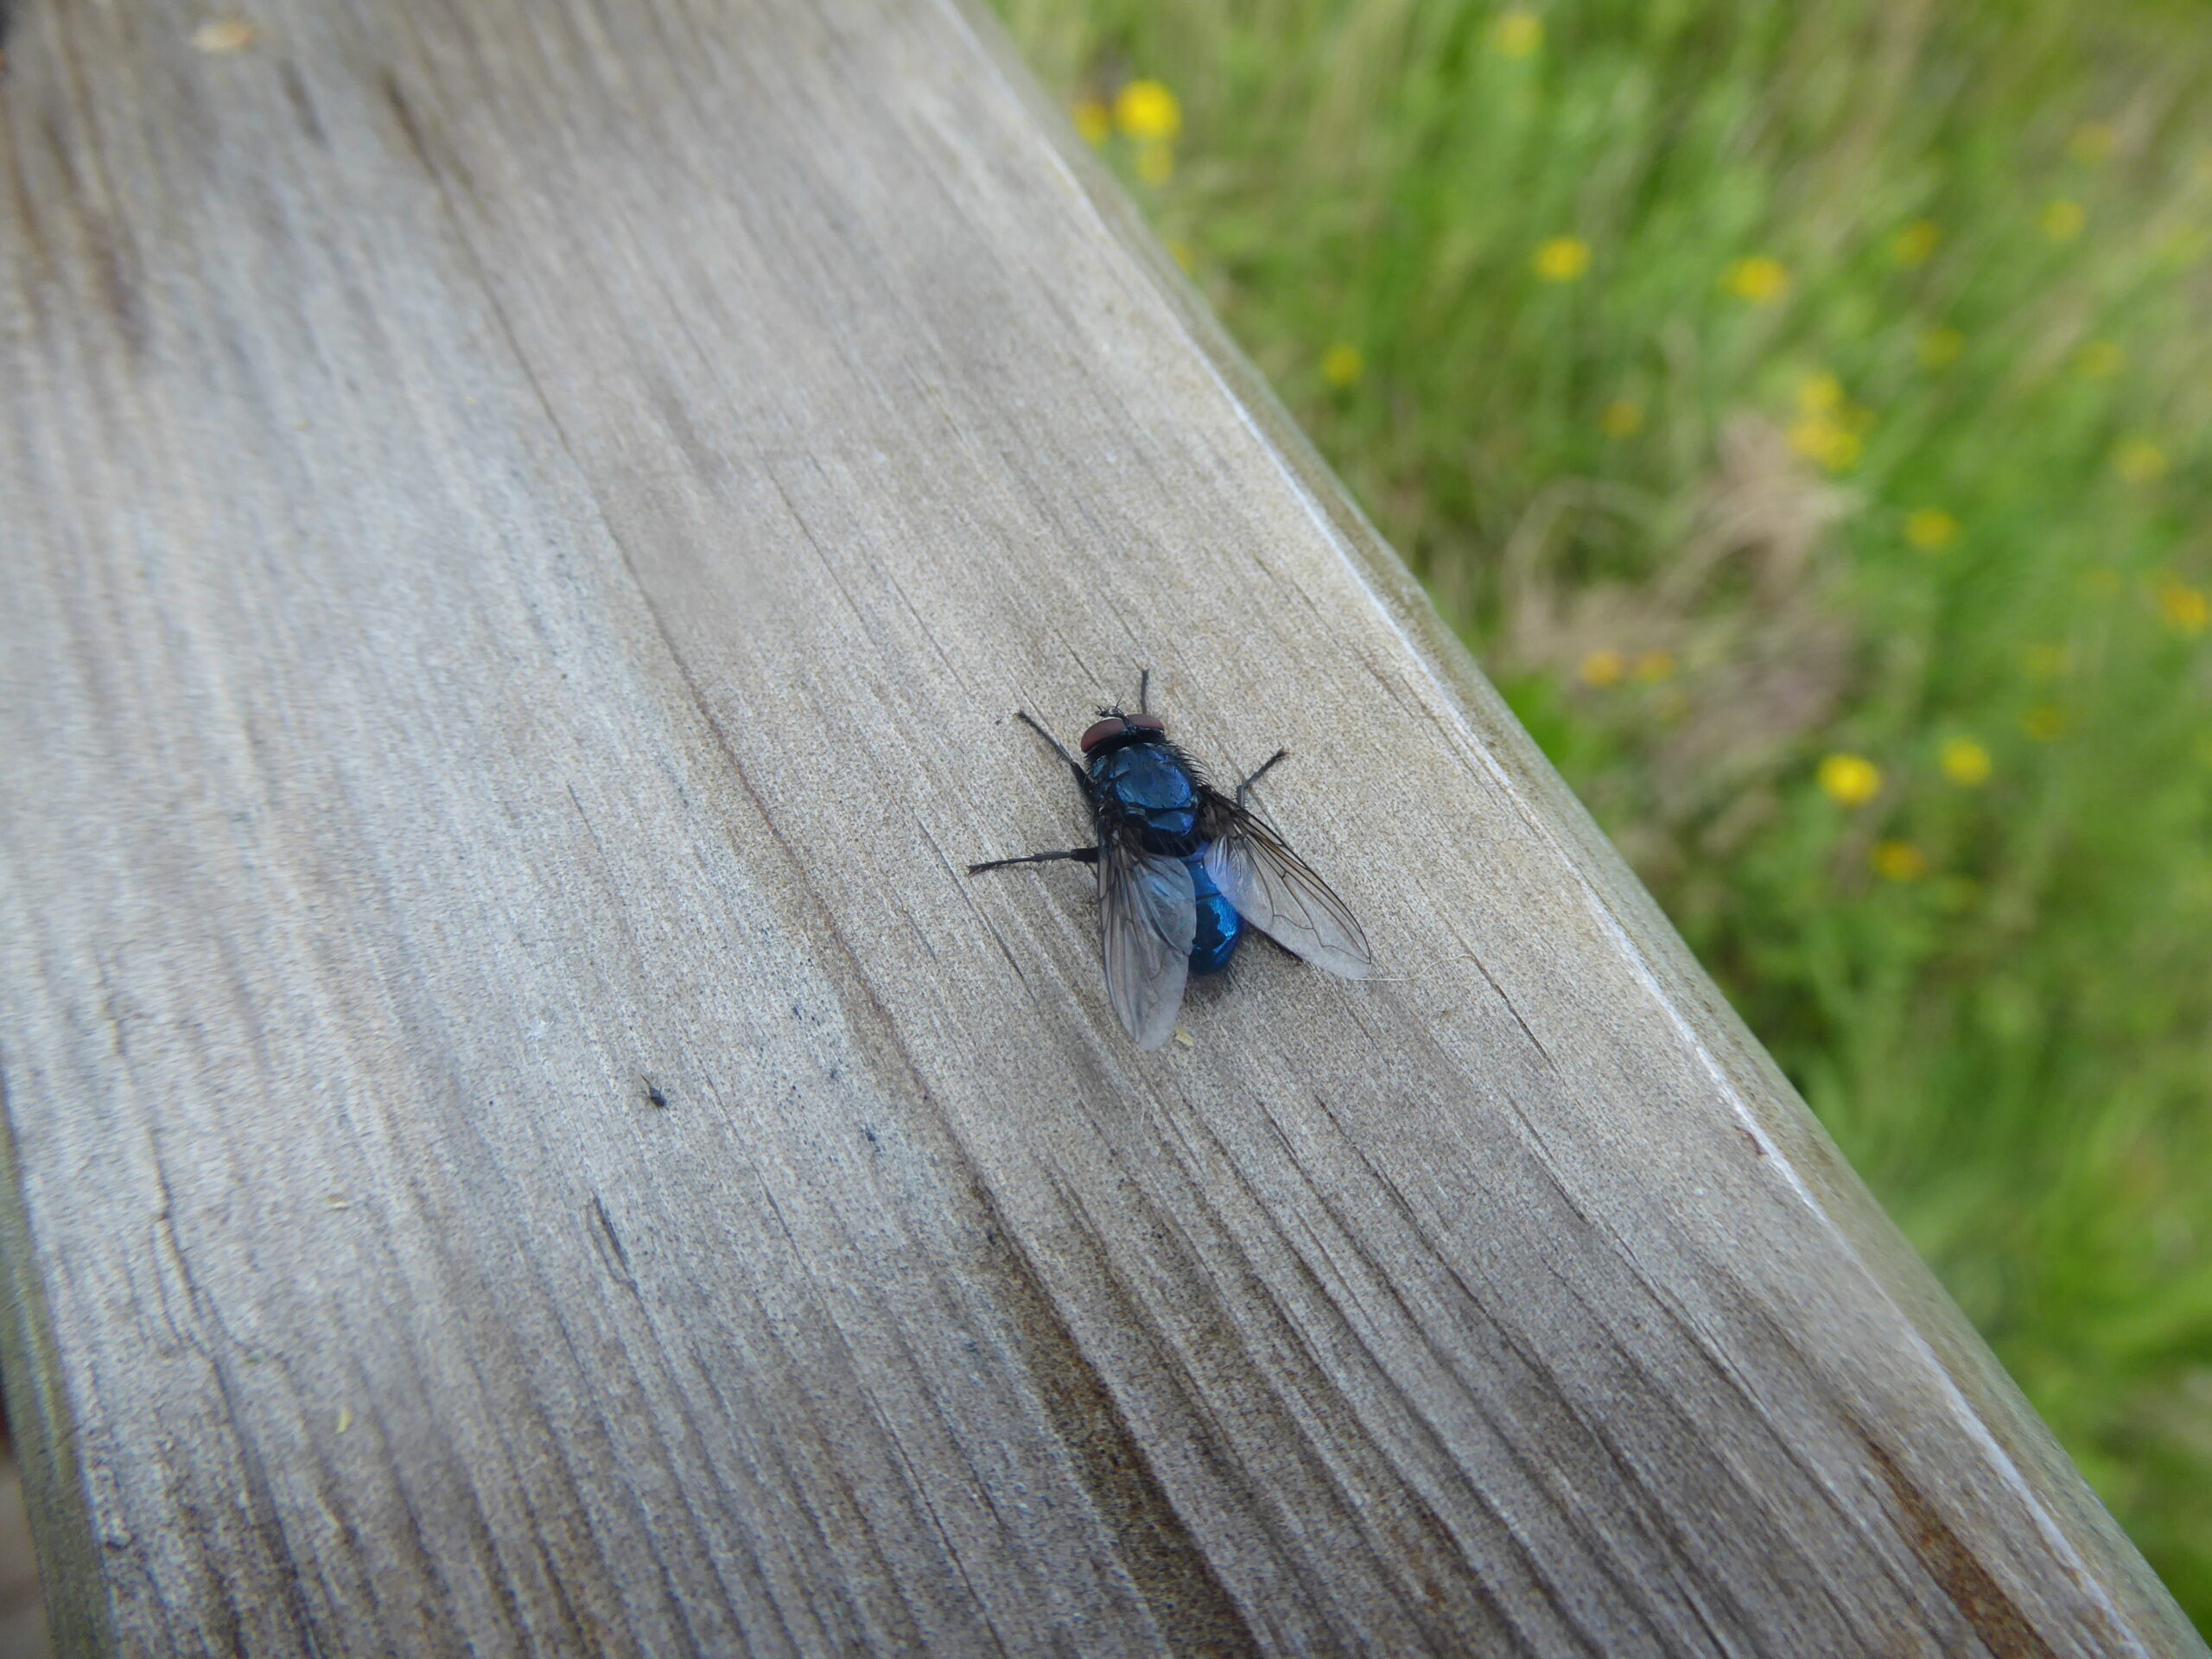 Common Bluebottle and Flesh Fly